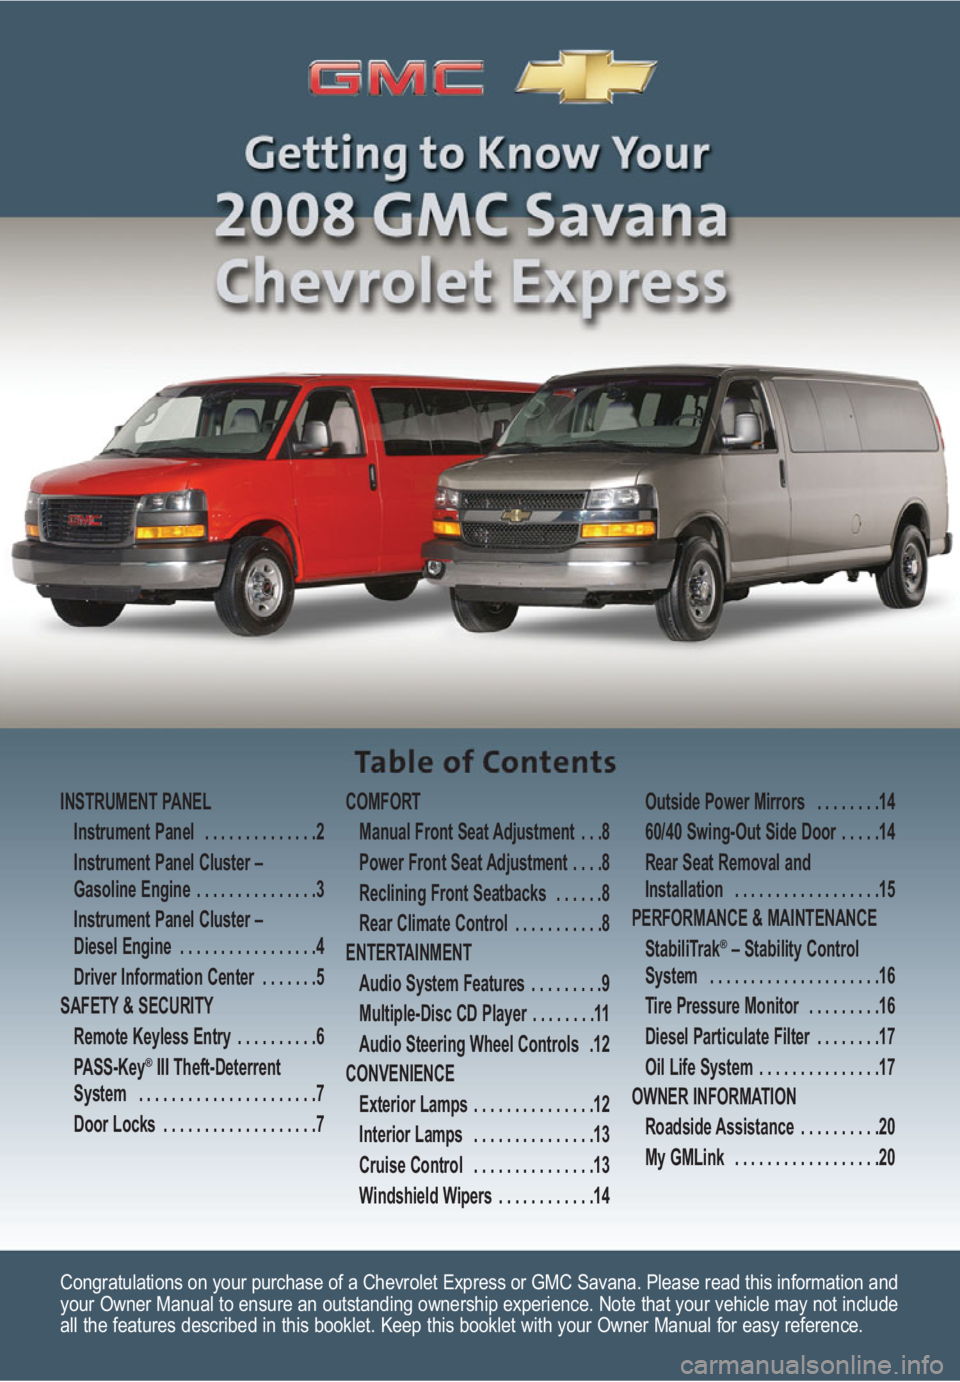 GMC SAVANA 2008  Get To Know Guide Congratulations on your purchase of a Chevrolet Express or GMC Savana. Please read this information and
your Owner Manual to ensure an outstanding ownership experience. Note that your vehicle may not 